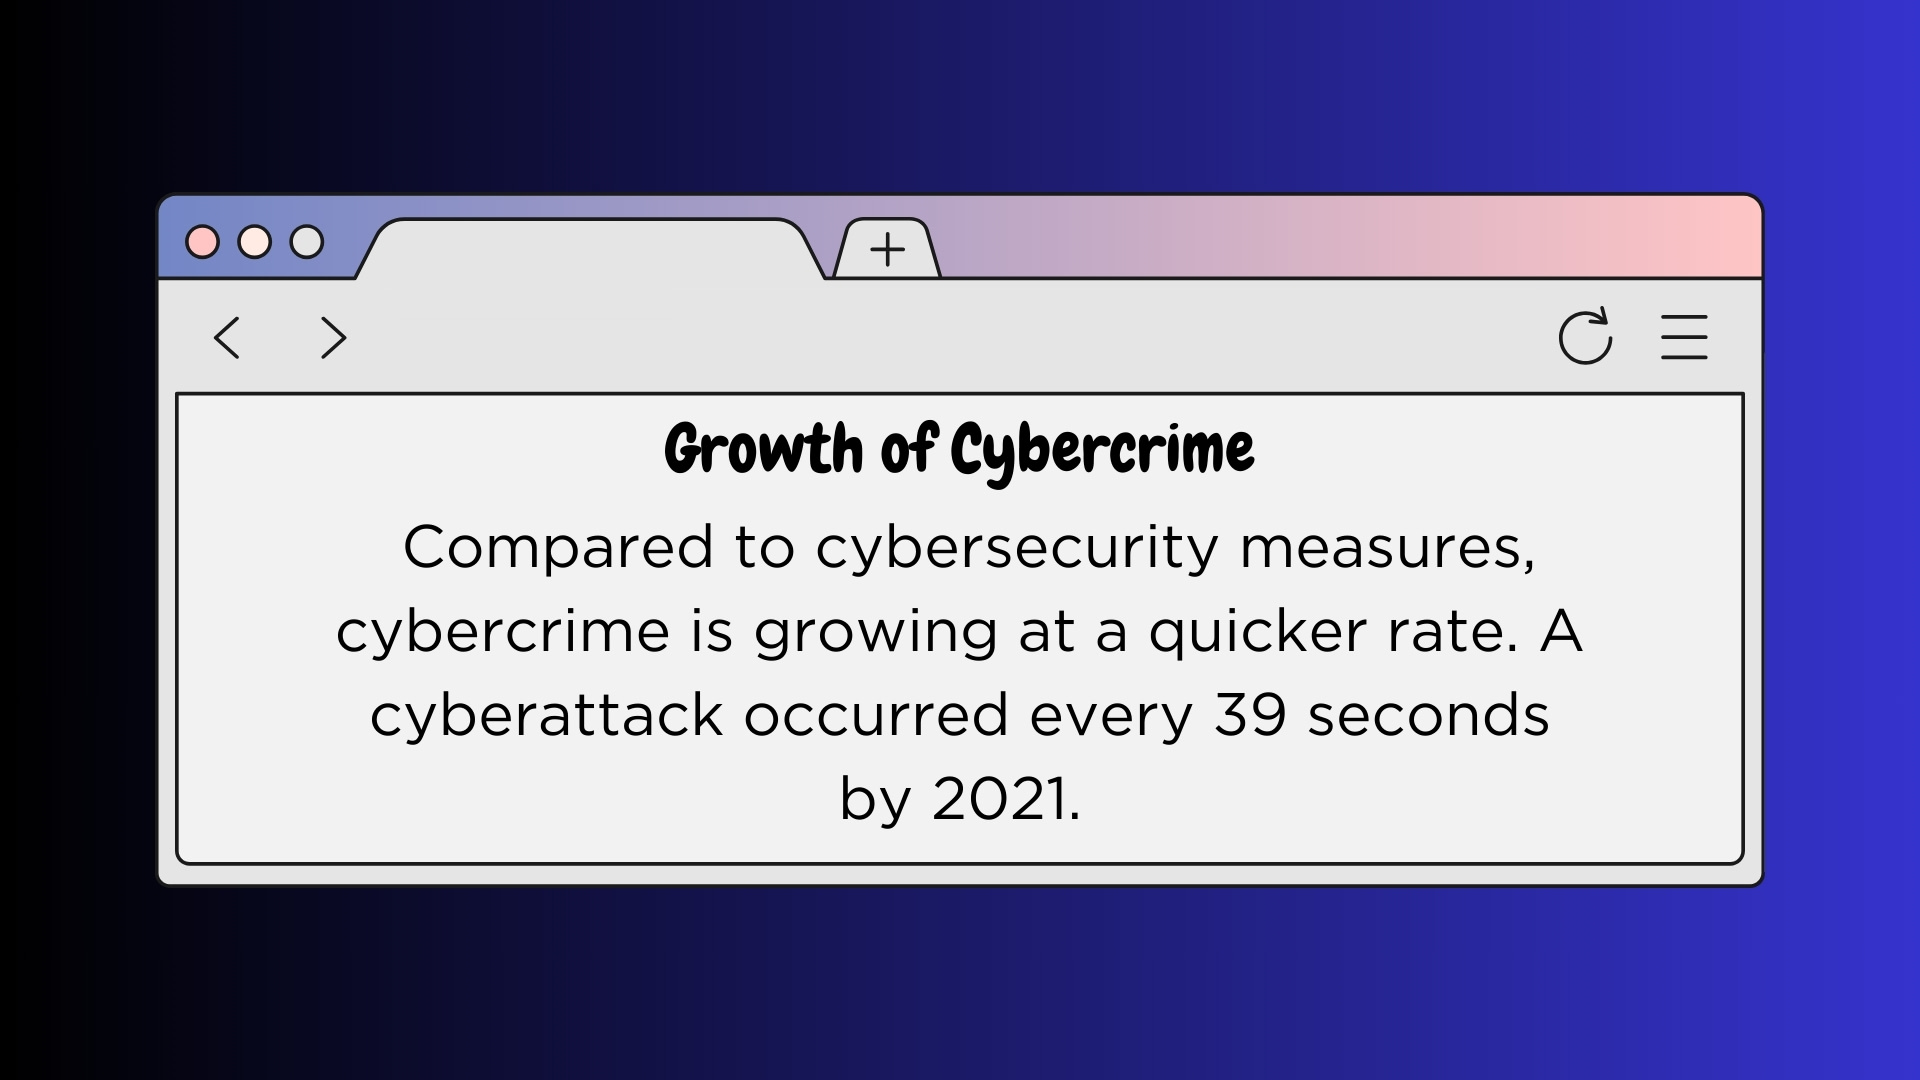 Growth of Cybercrime: Compared to cybersecurity measures, cybercrime is growing at a quicker rate. A cyberattack occurred every 39 seconds by 2021.